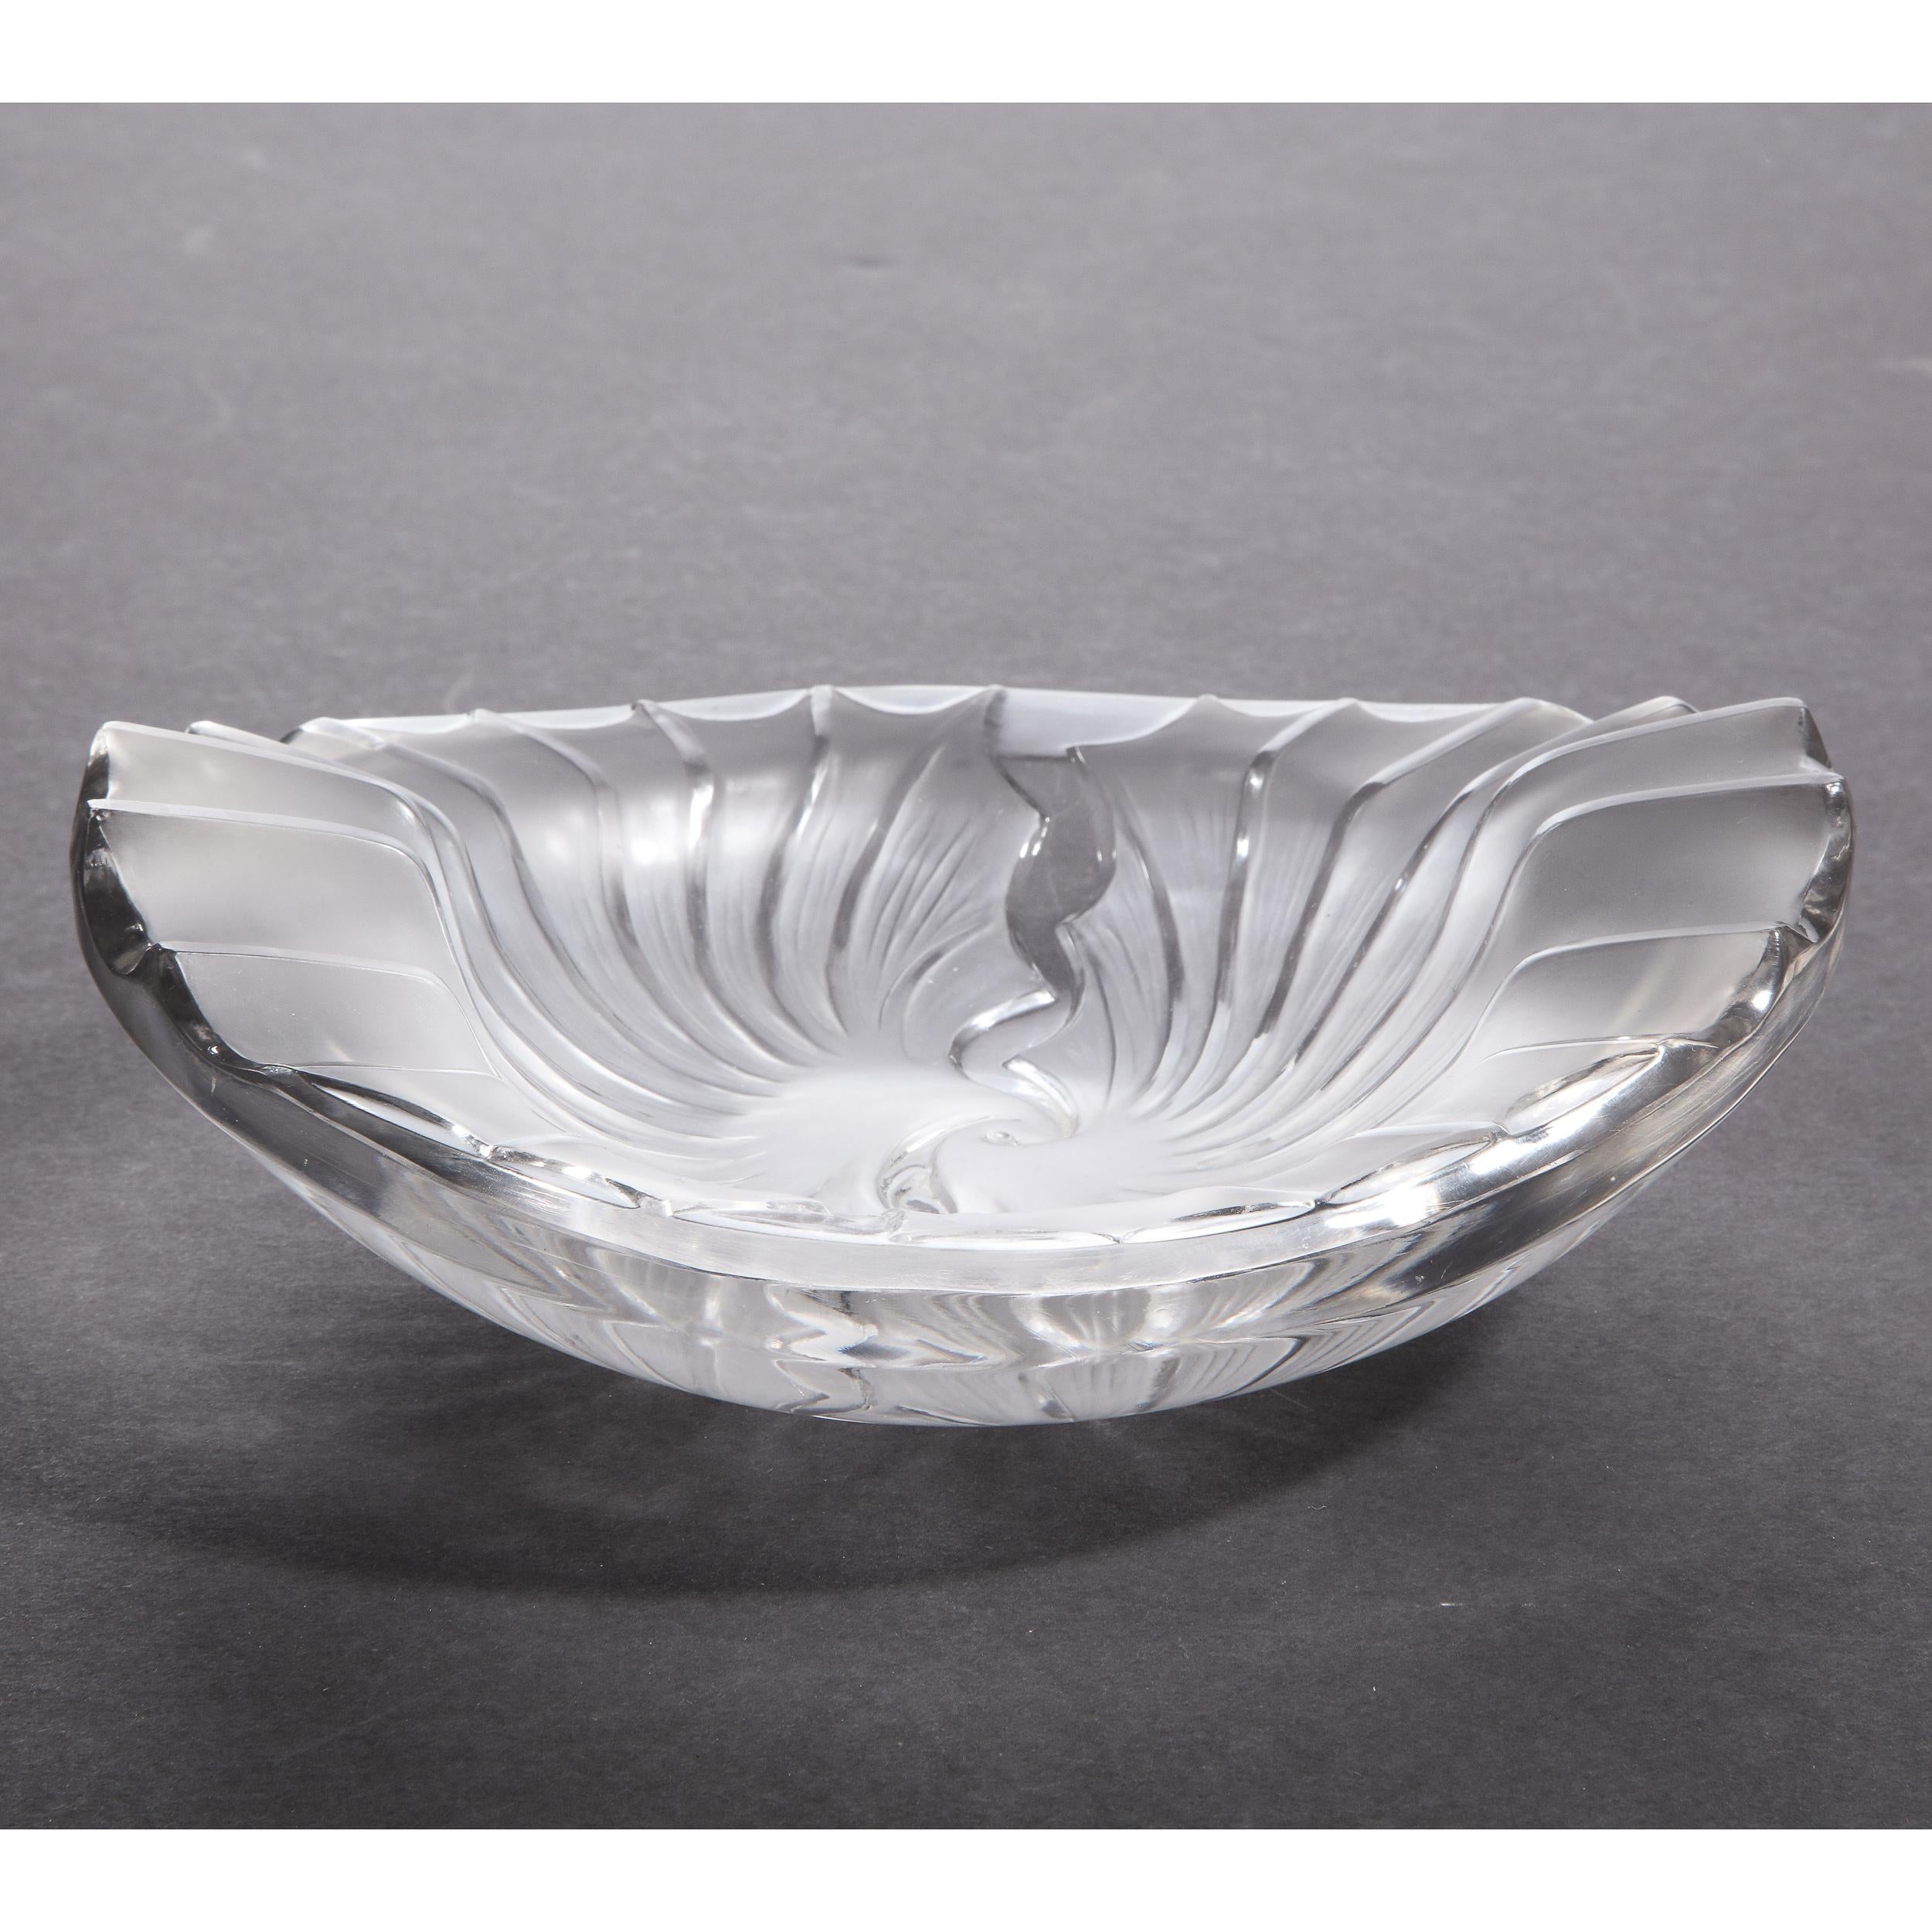 20th Century French Modernist Frosted & Translucent Crystal Decorative Bowl by Lalique